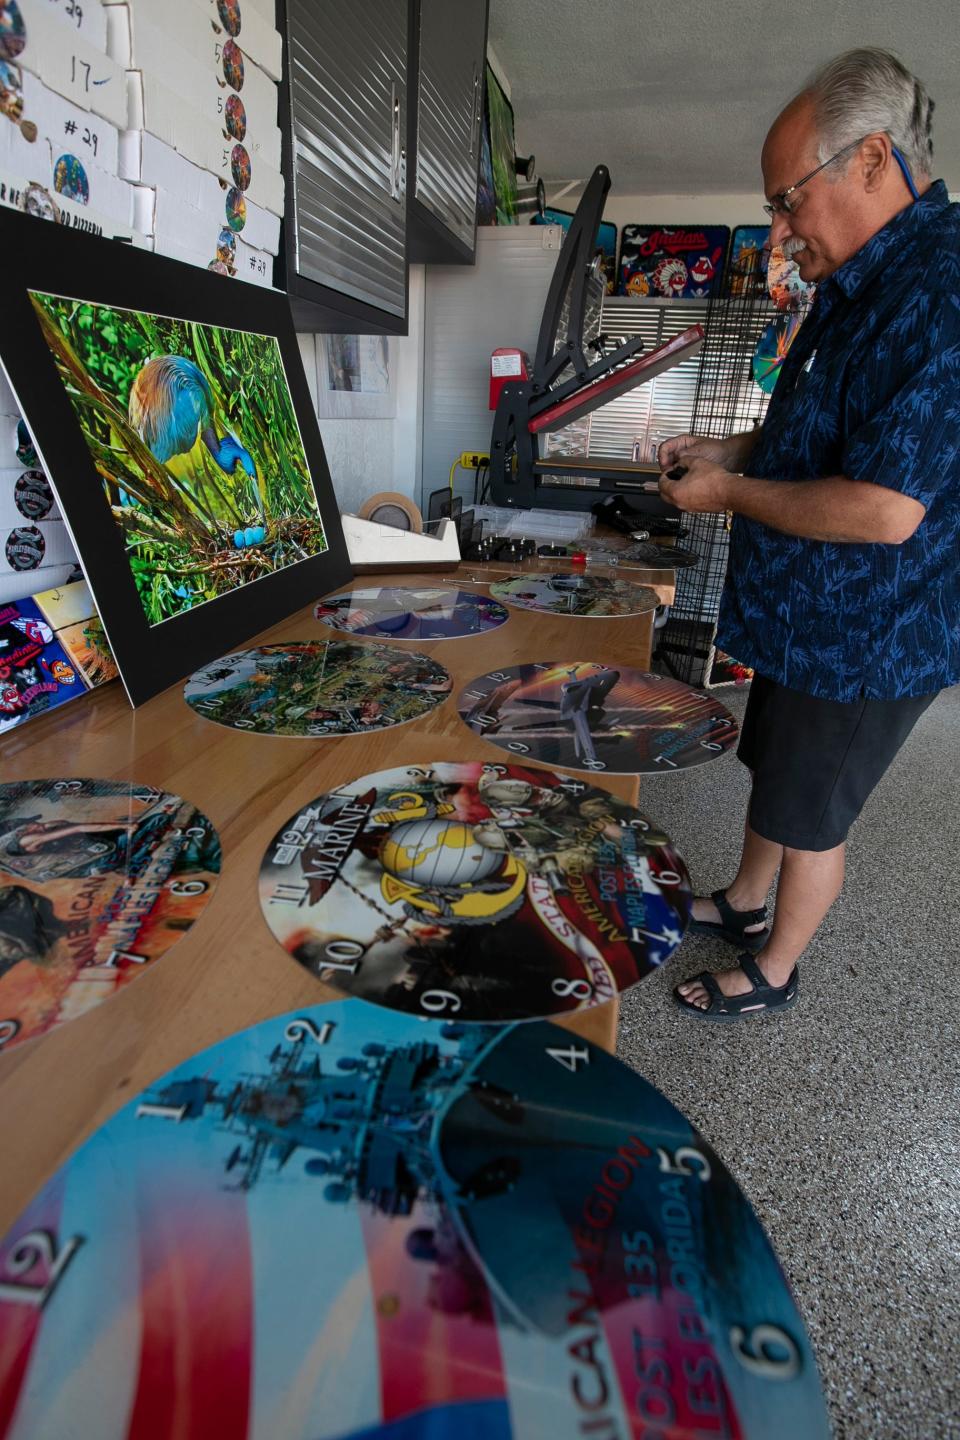 Cape Coral-based graphic artist Girard Moravcik was named the Best Digital Artist at the 2022 Cape Coral Art Festival and Marketplace.